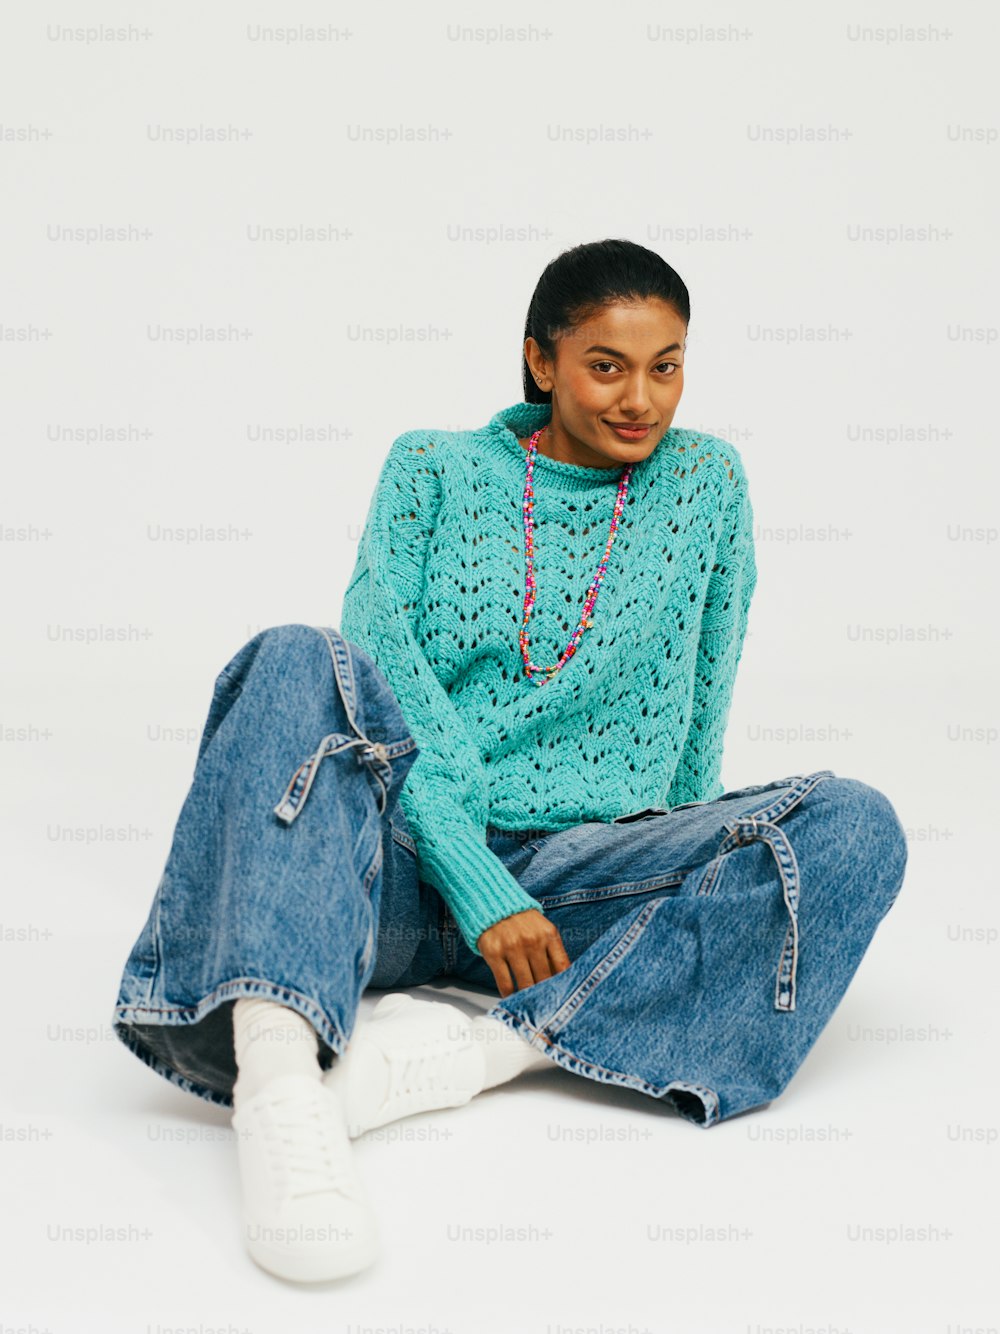 a woman sitting on the ground wearing a blue sweater and jeans